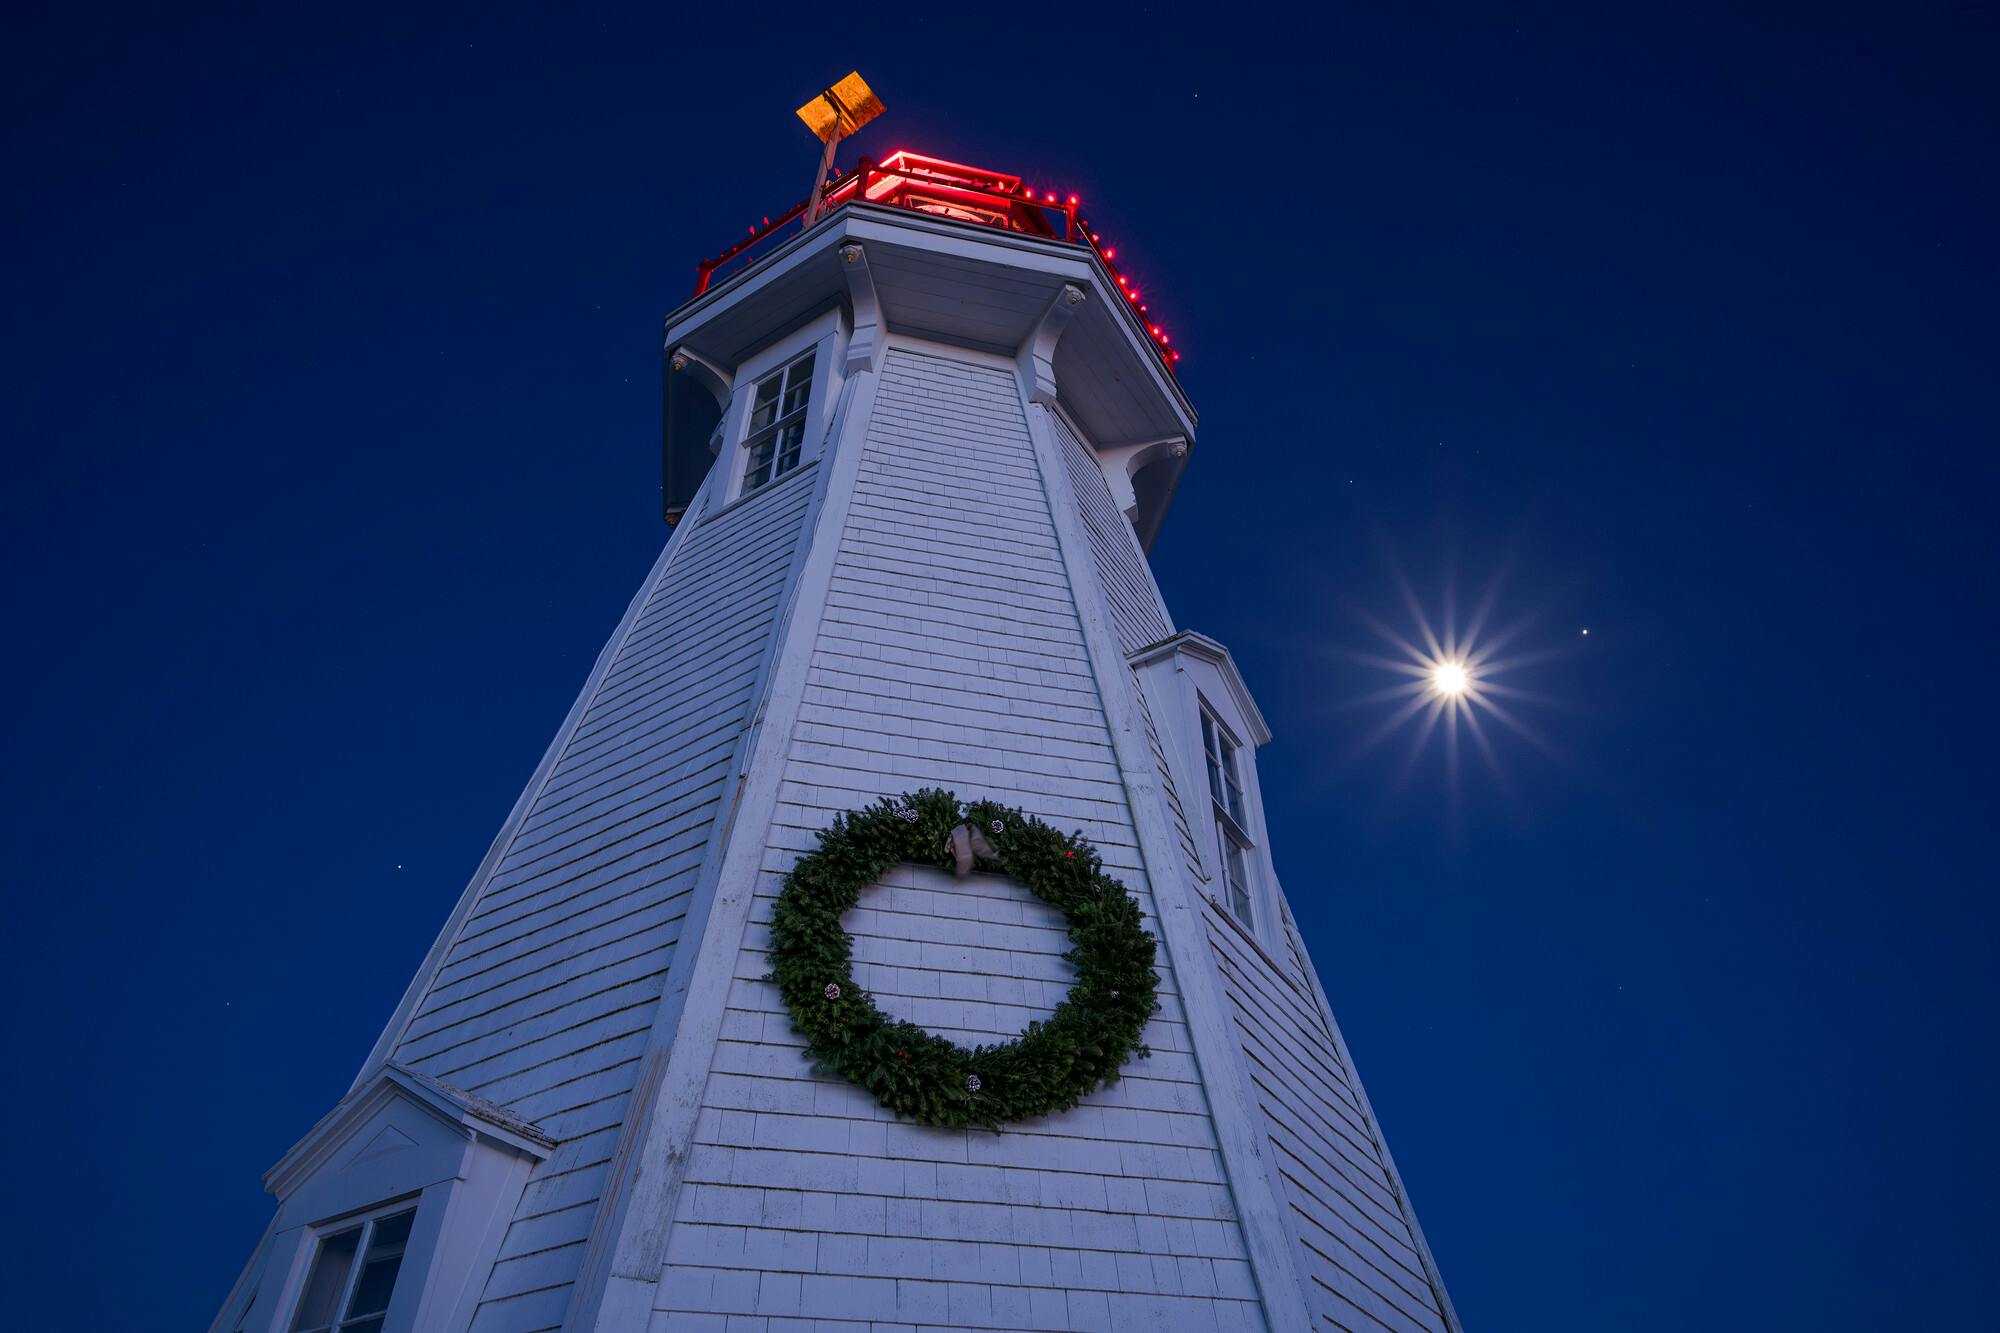 Moon and Wreath at Mulholland Lighthouse